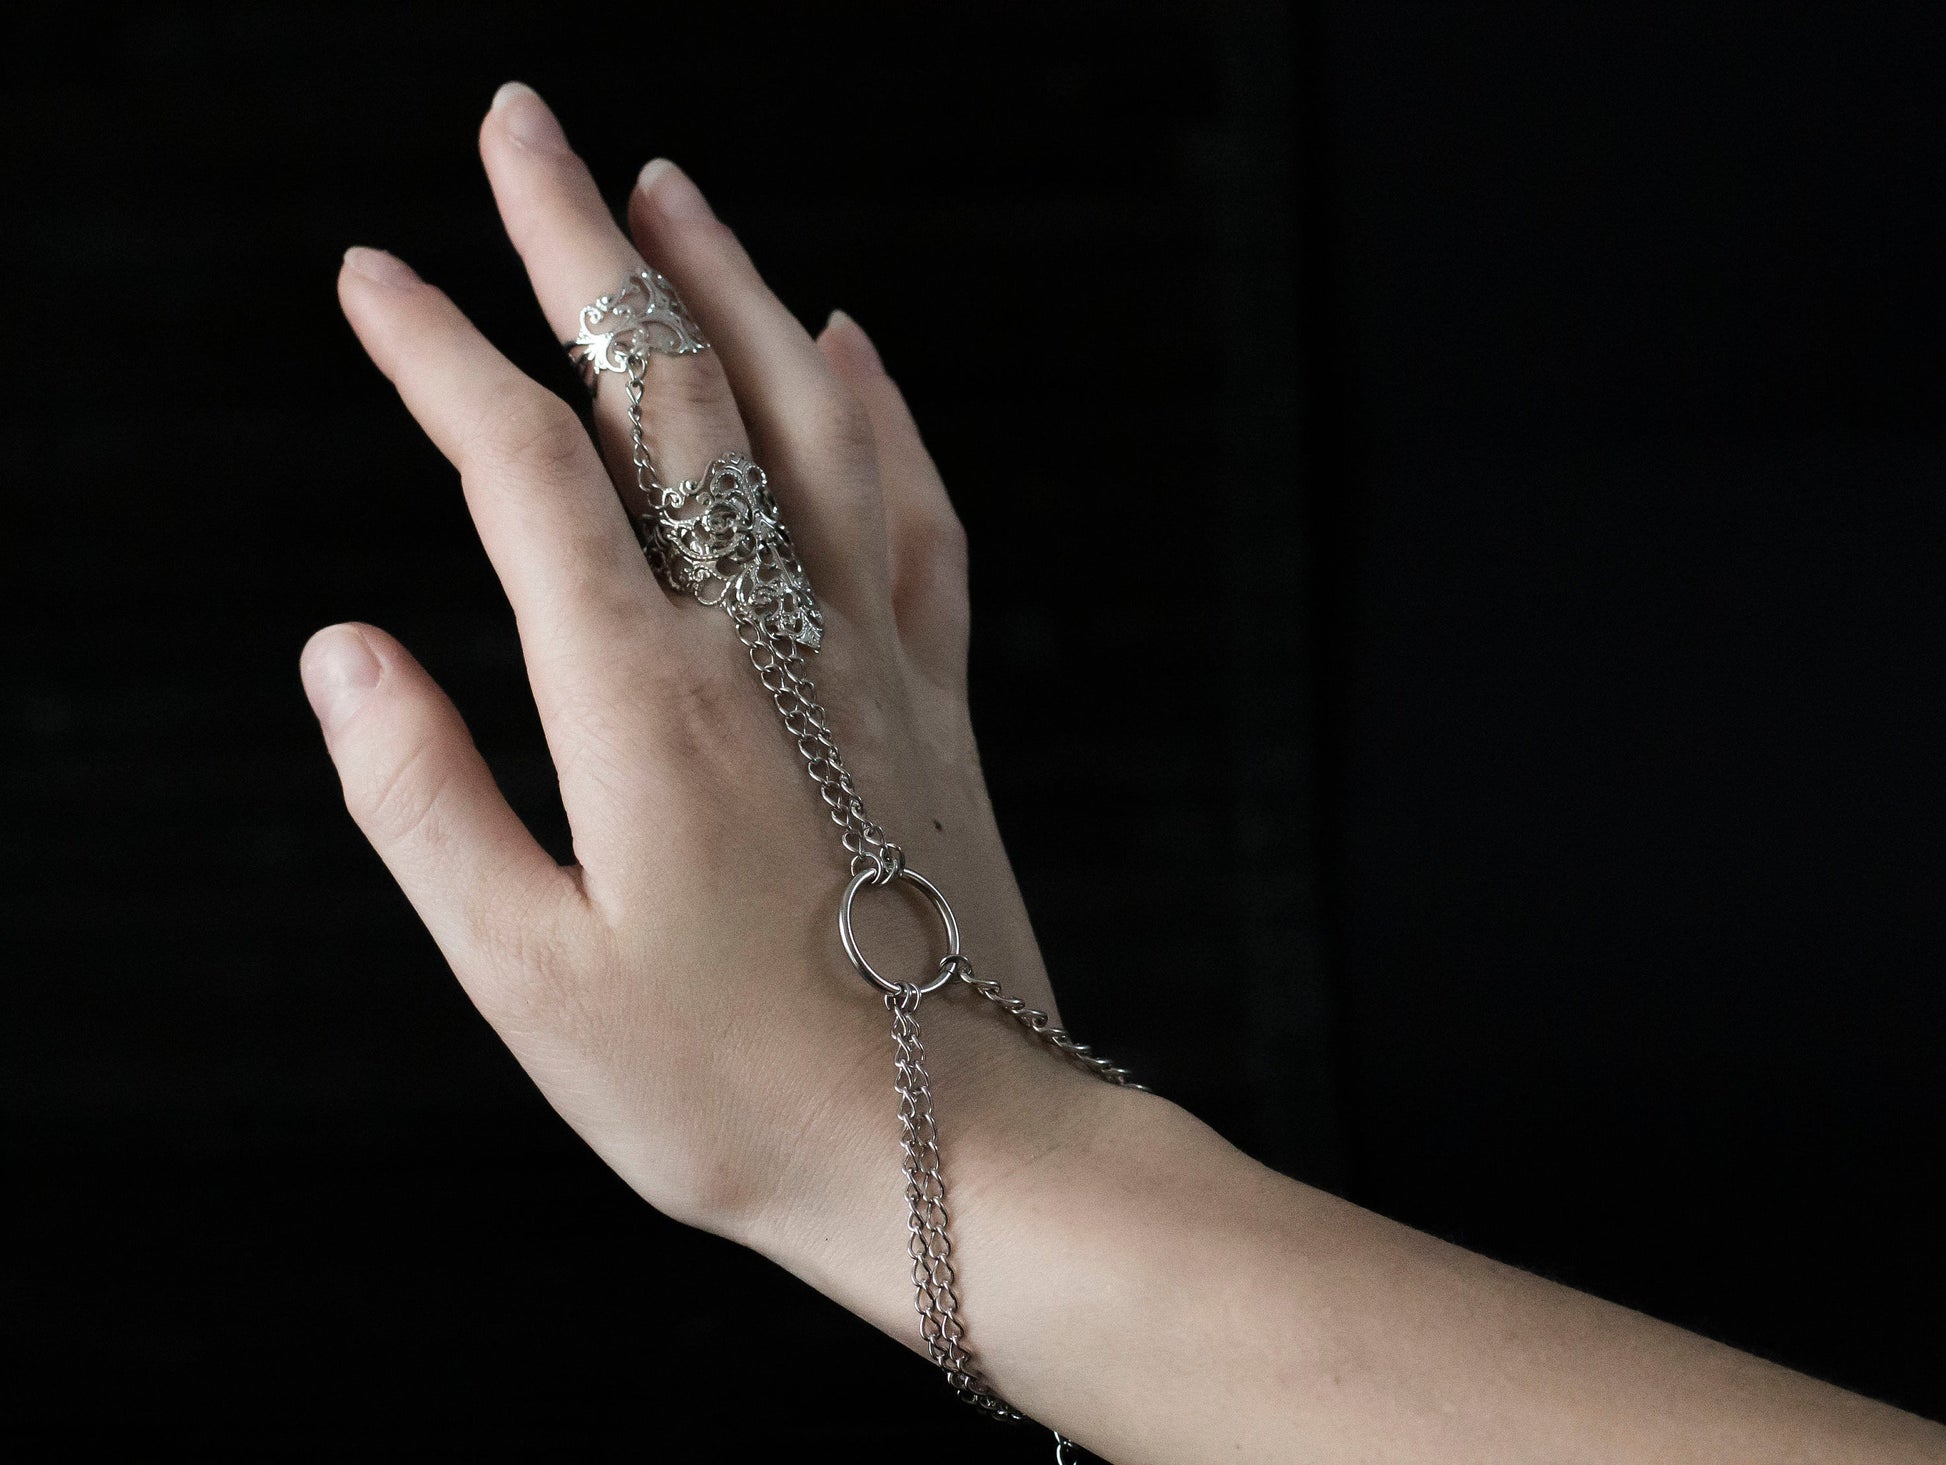 Elevate your gothic-chic style with this Myril Jewels hand chain bracelet ring, designed for the sophisticated avant-garde enthusiast. This piece features an intricate filigree design, exuding a dark, elegant allure perfect for everyday wear or a rave party statement. Crafted with the whimsigoth aesthetic in mind, the striking contrast of the shiny silver against the model's black stiletto nails encapsulates a neo-gothic vibe, making it a timeless addition to any witchcore or minimal goth jewelry collectio